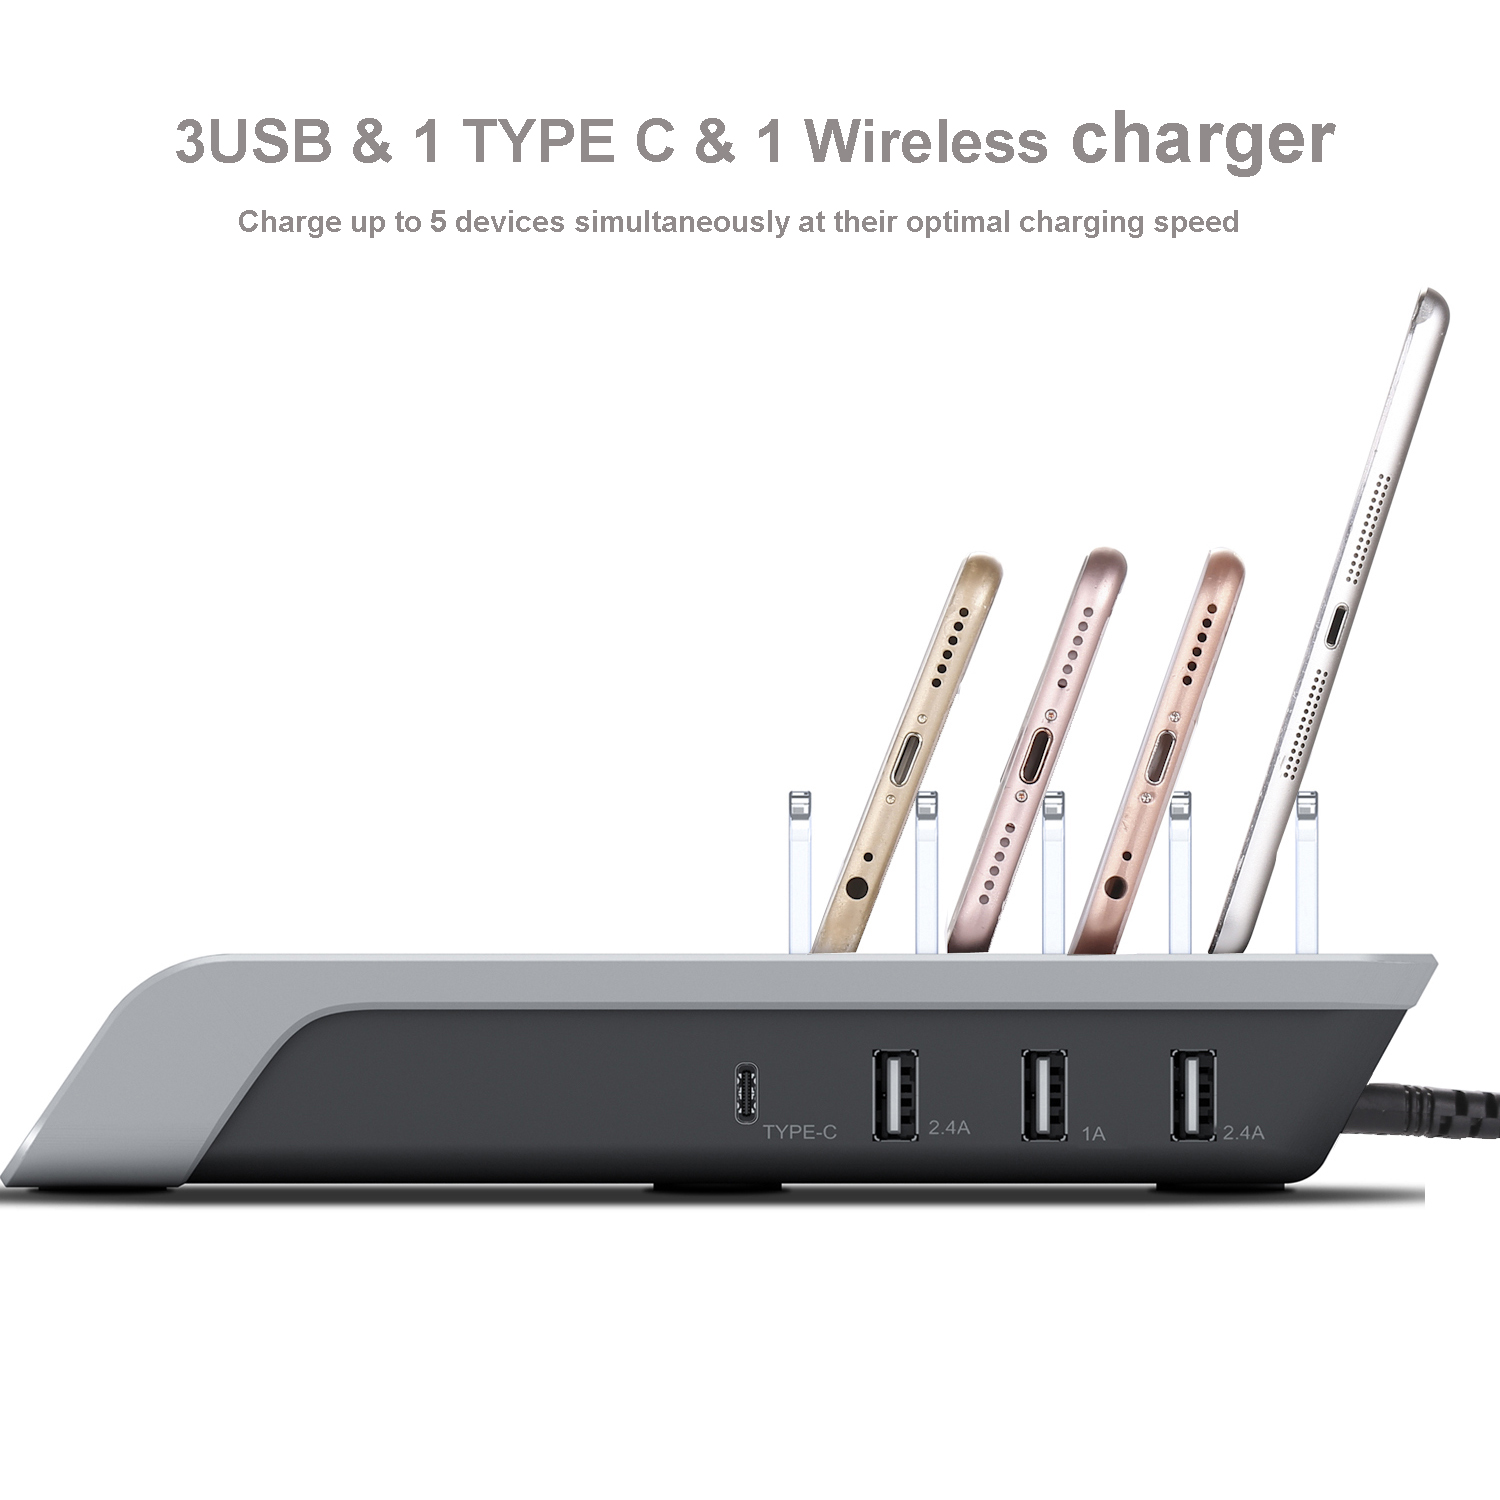 Bakeey-45W-9A-Four-USB-Type-C-LED-Indicator-Multifunctional-Fast-Charging-Wireless-Charger-Station-D-1646804-3